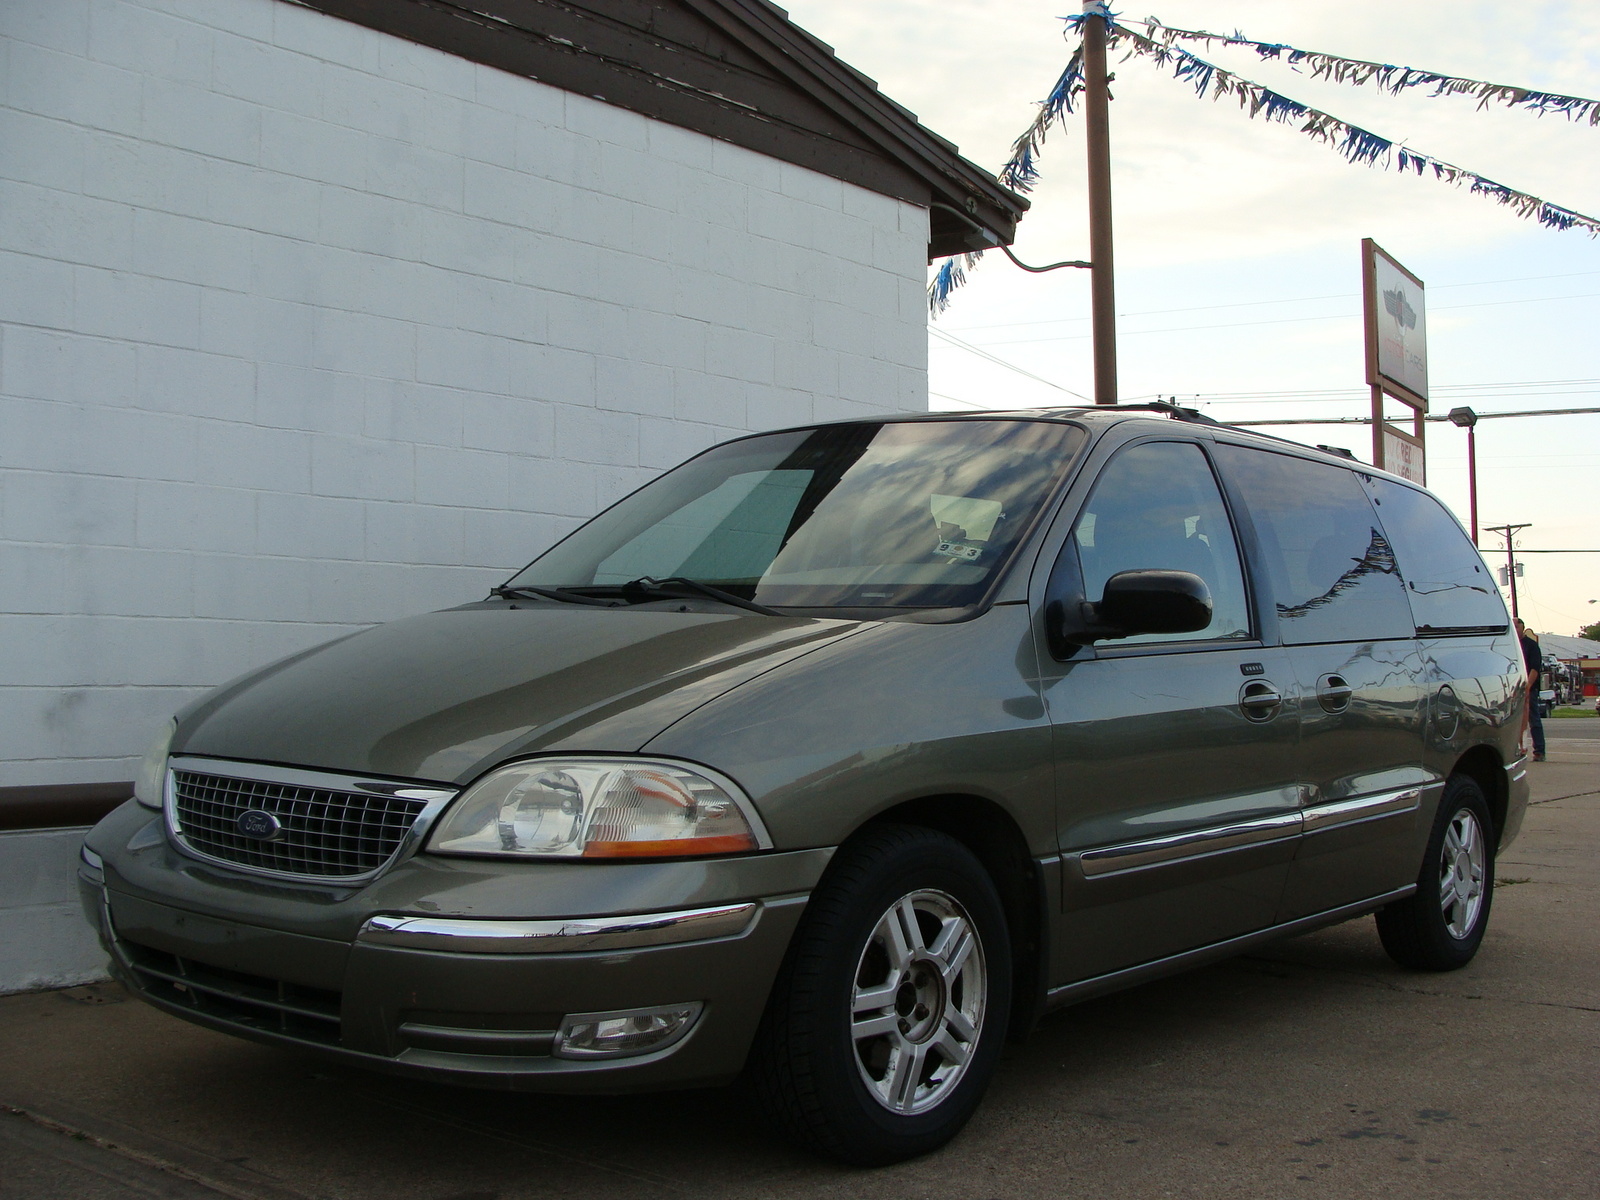 2001 Ford windstar limited specs #9